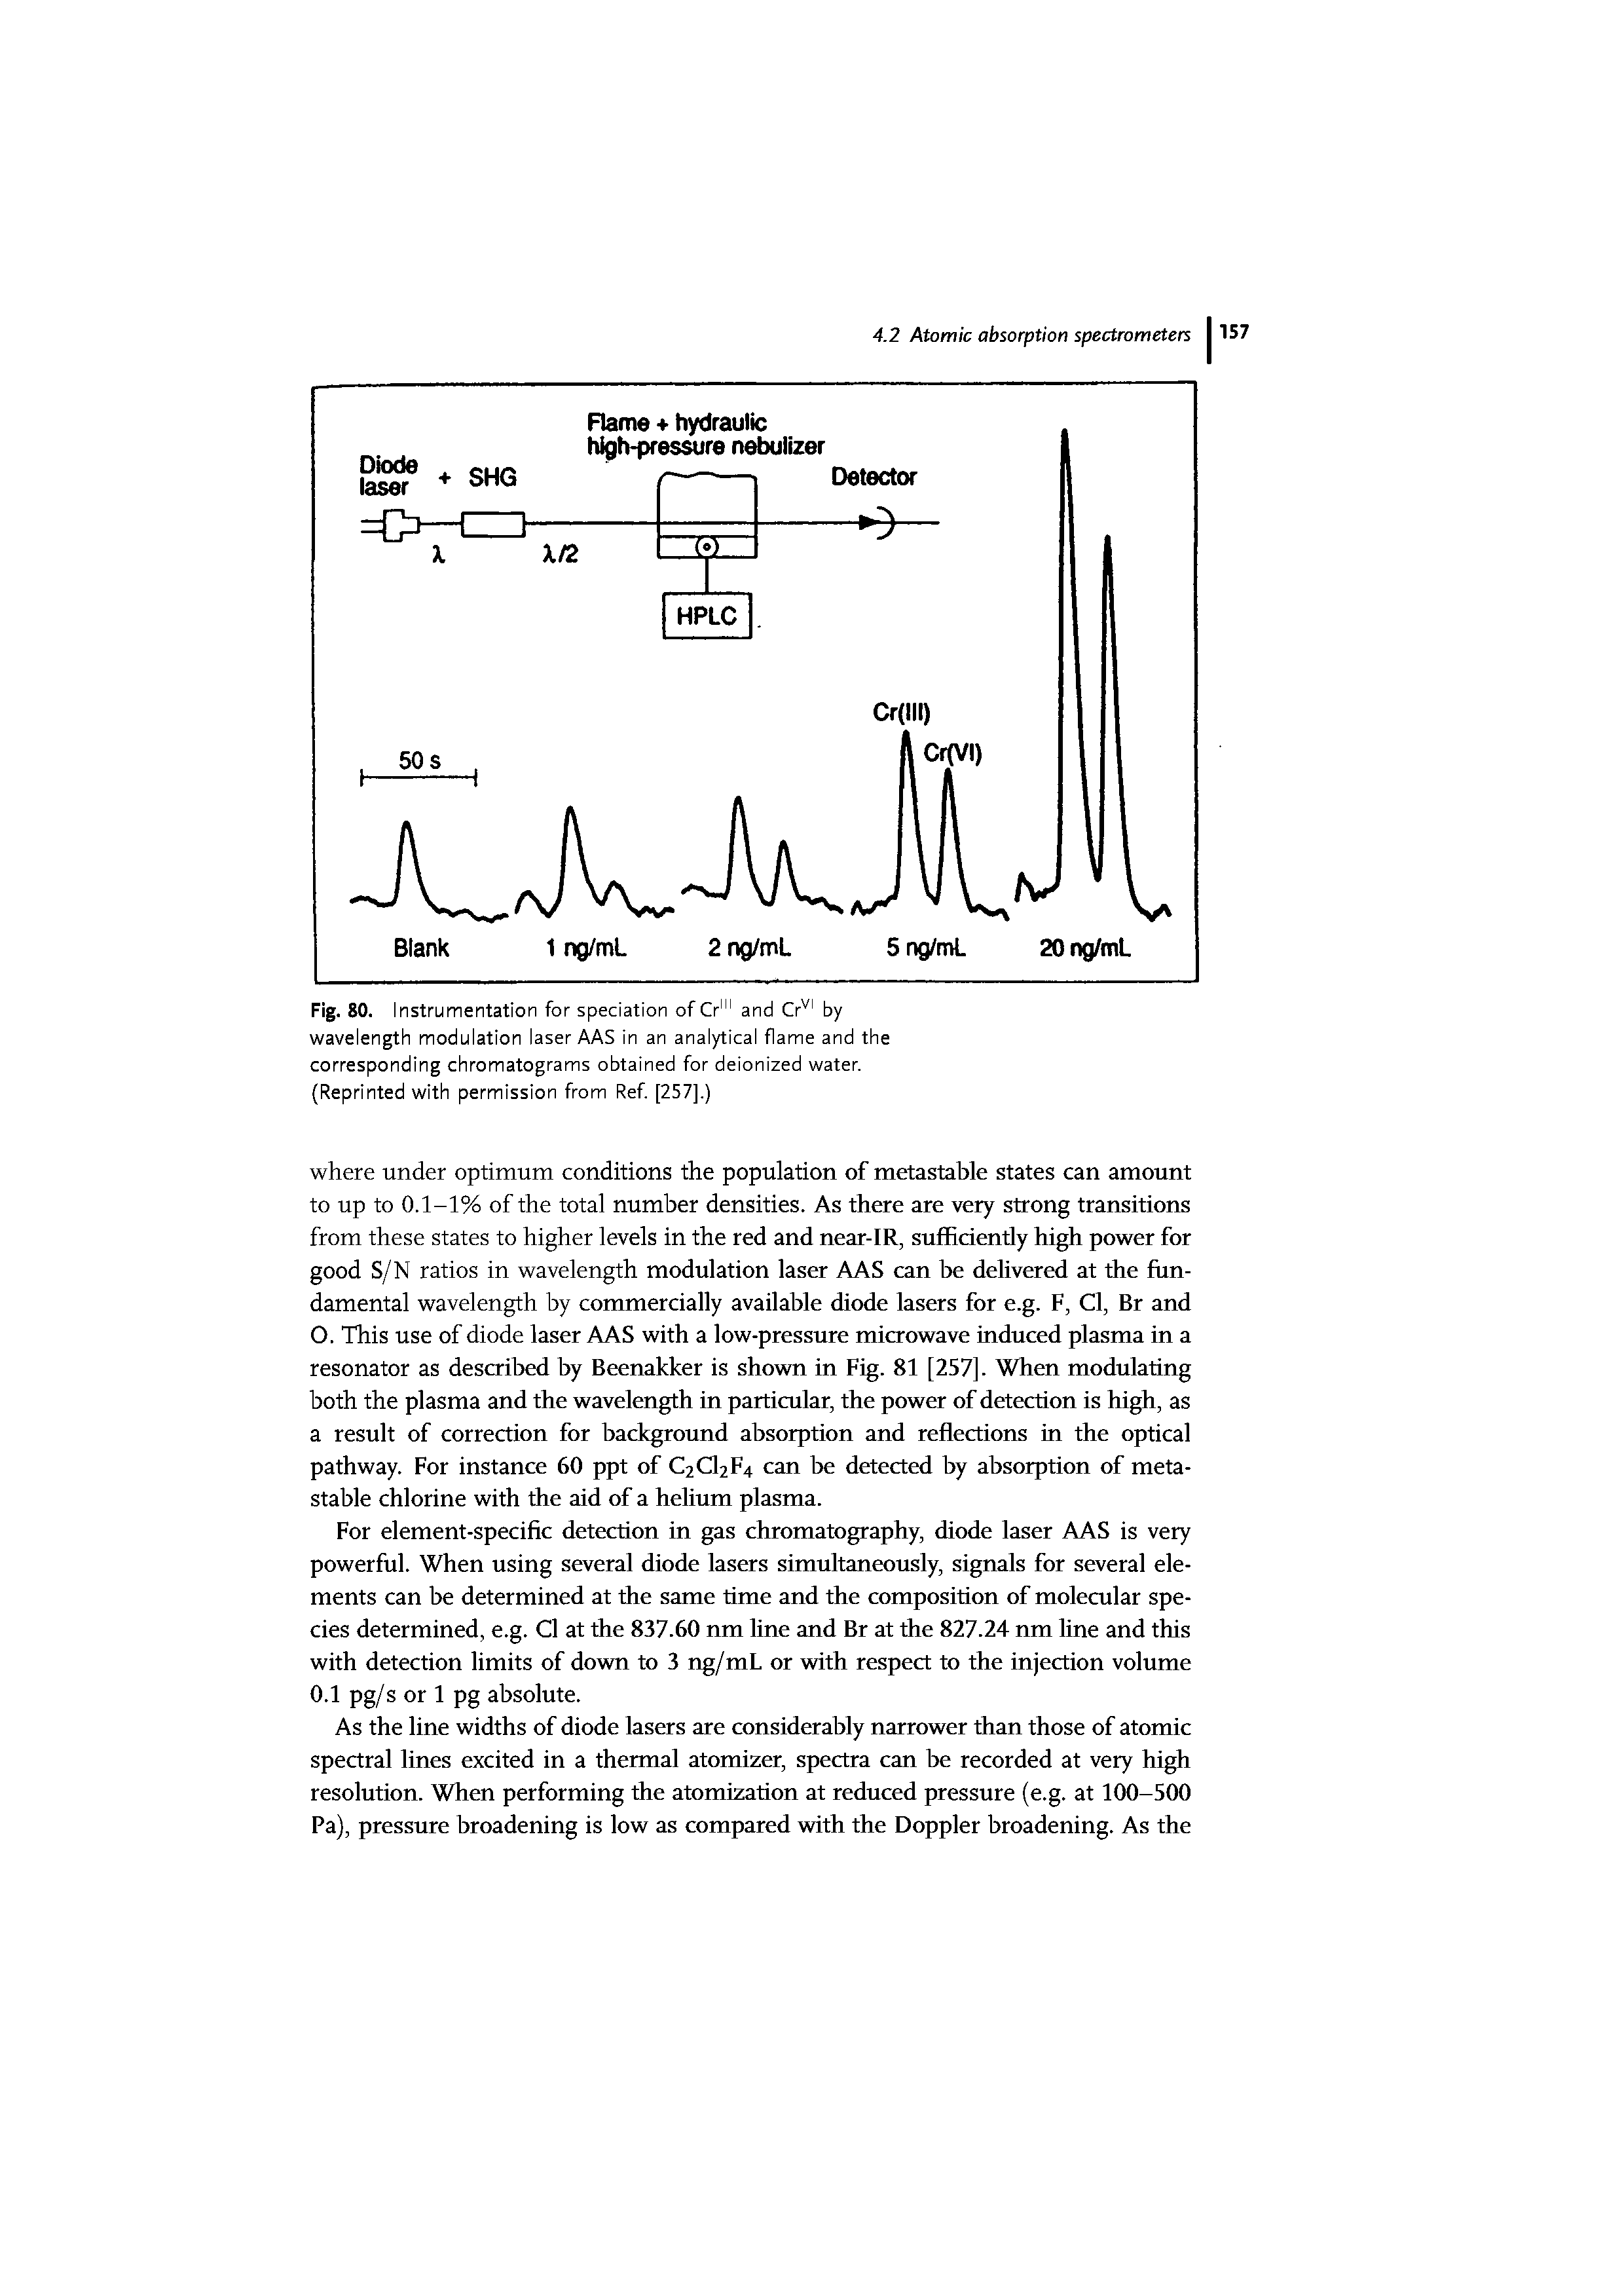 Fig. 80. I instrumentation for speciation of Crm and Crvl by wavelength modulation laser AAS in an analytical flame and the corresponding chromatograms obtained for deionized water. (Reprinted with permission from Ref. [257].)...